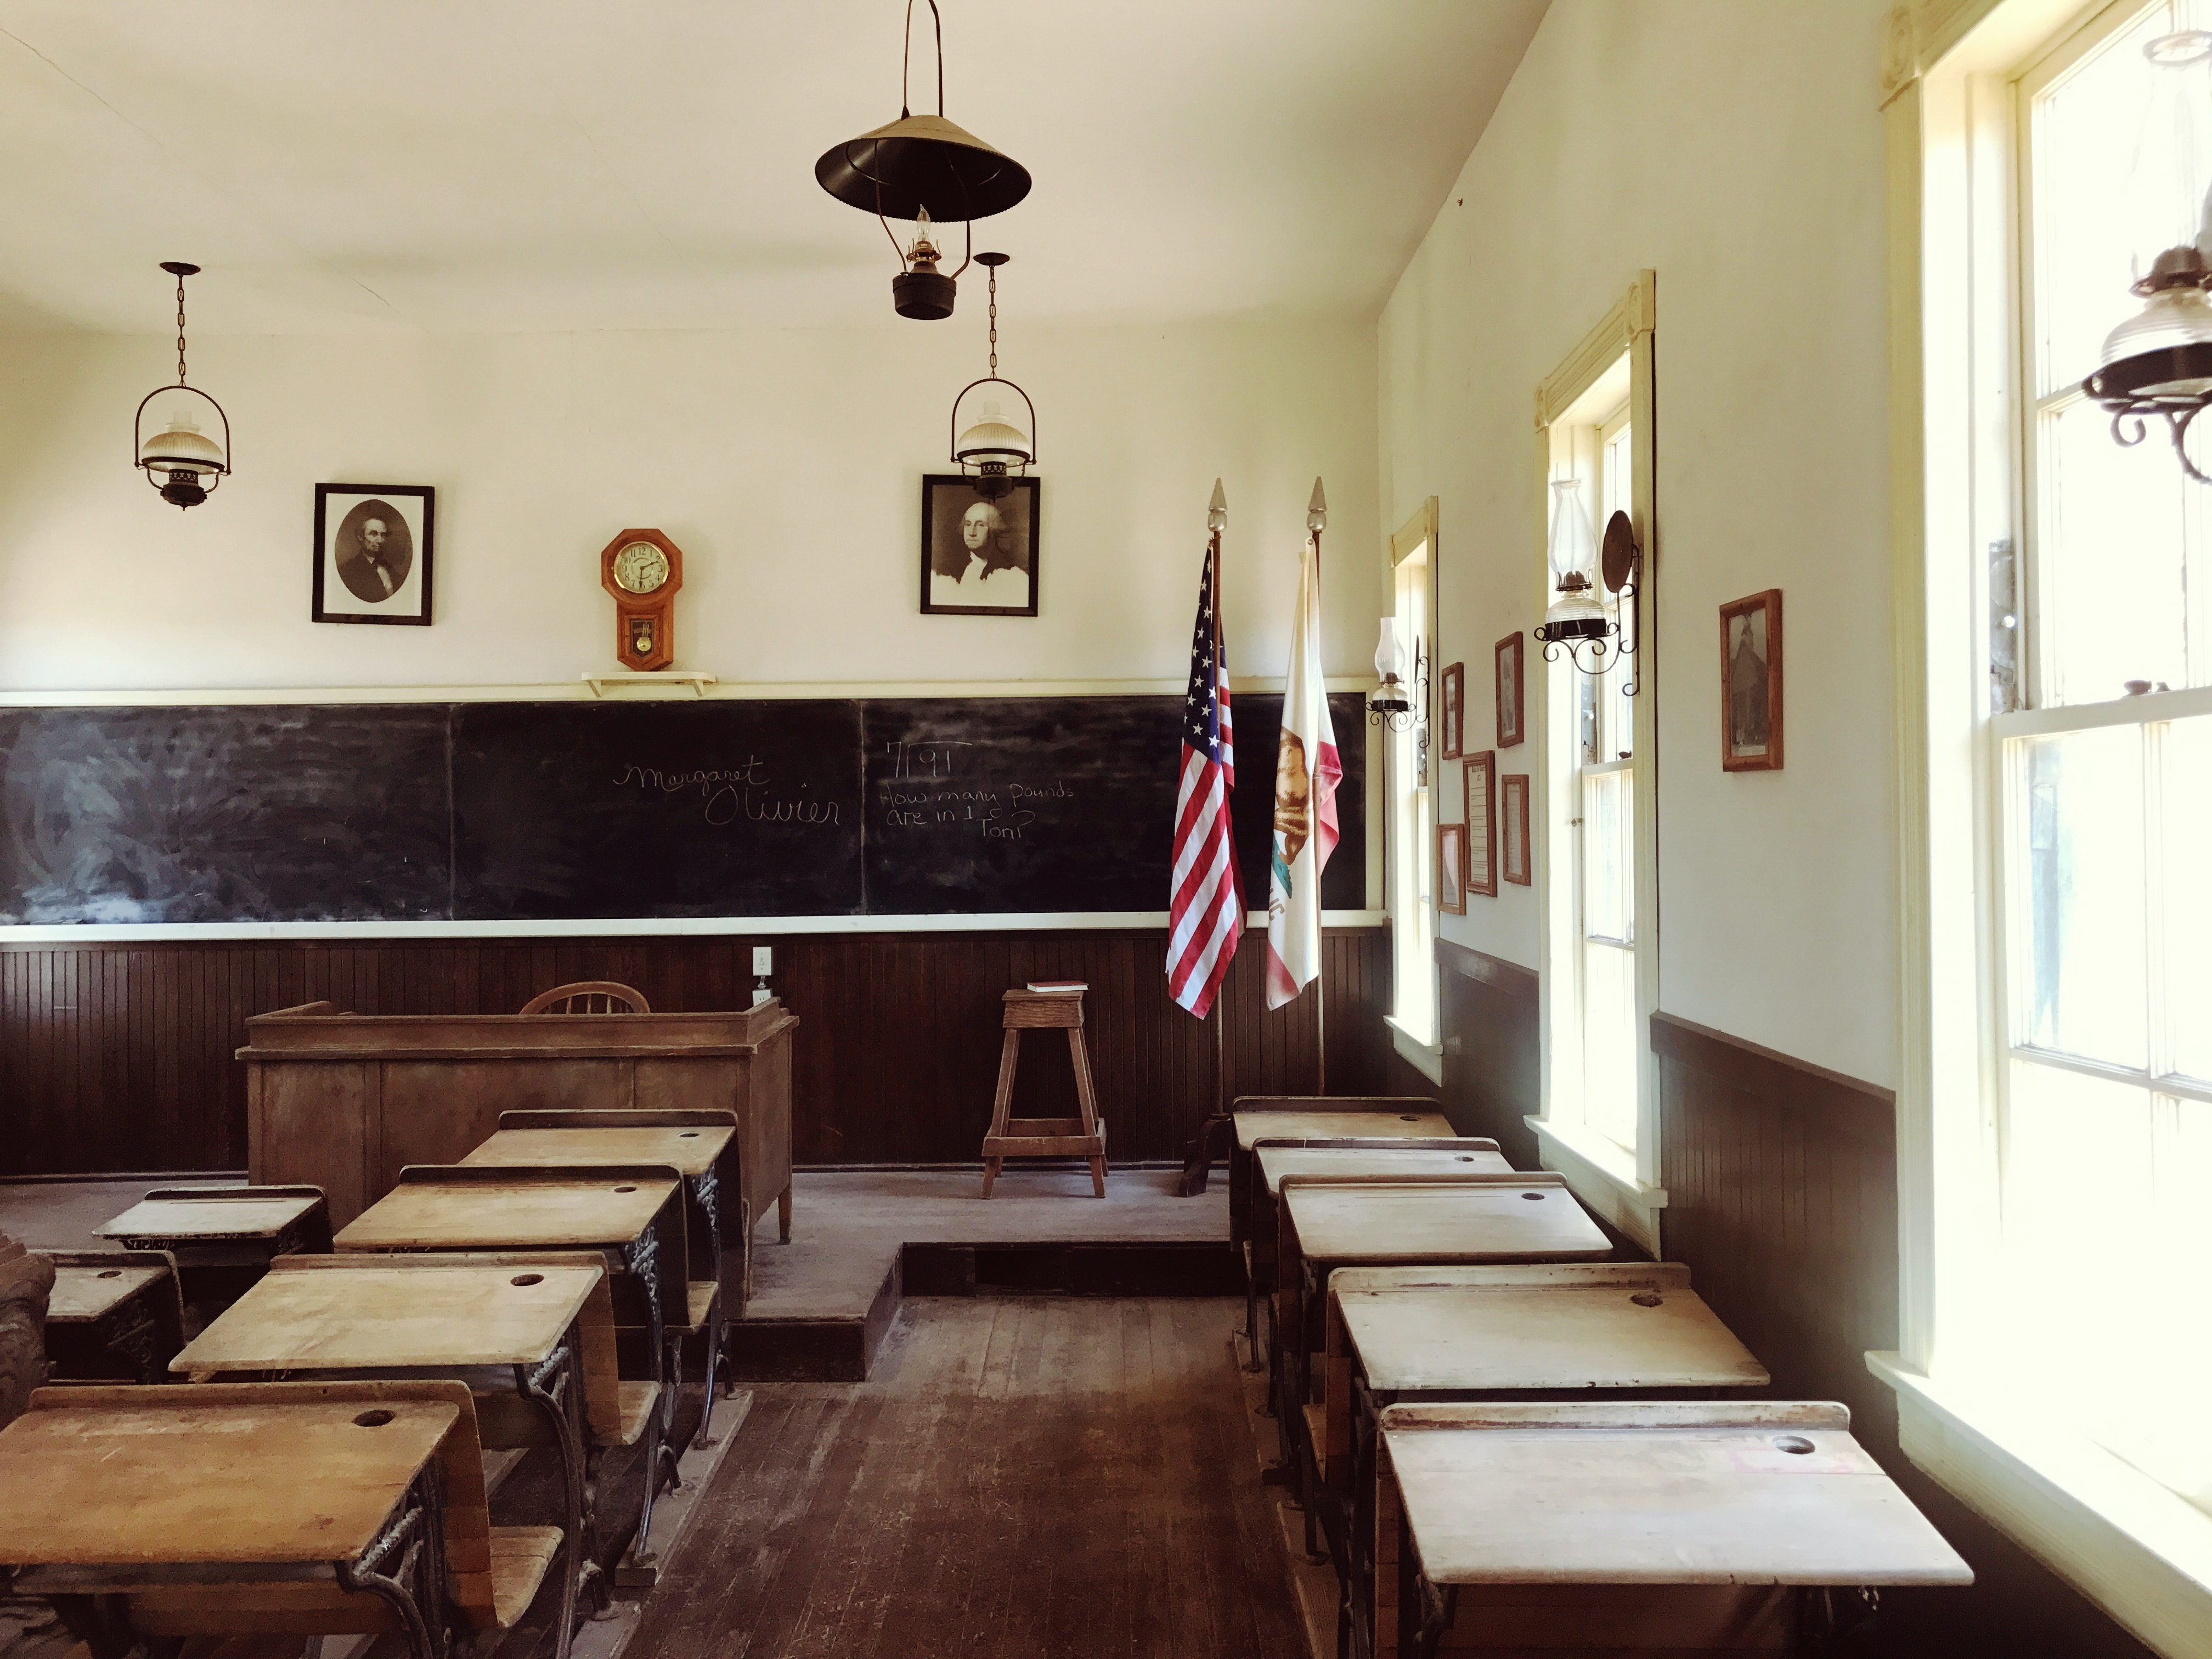 An empty classroom showing rows of desks facing a chalkboard, a teachers' desk, and 2 flags